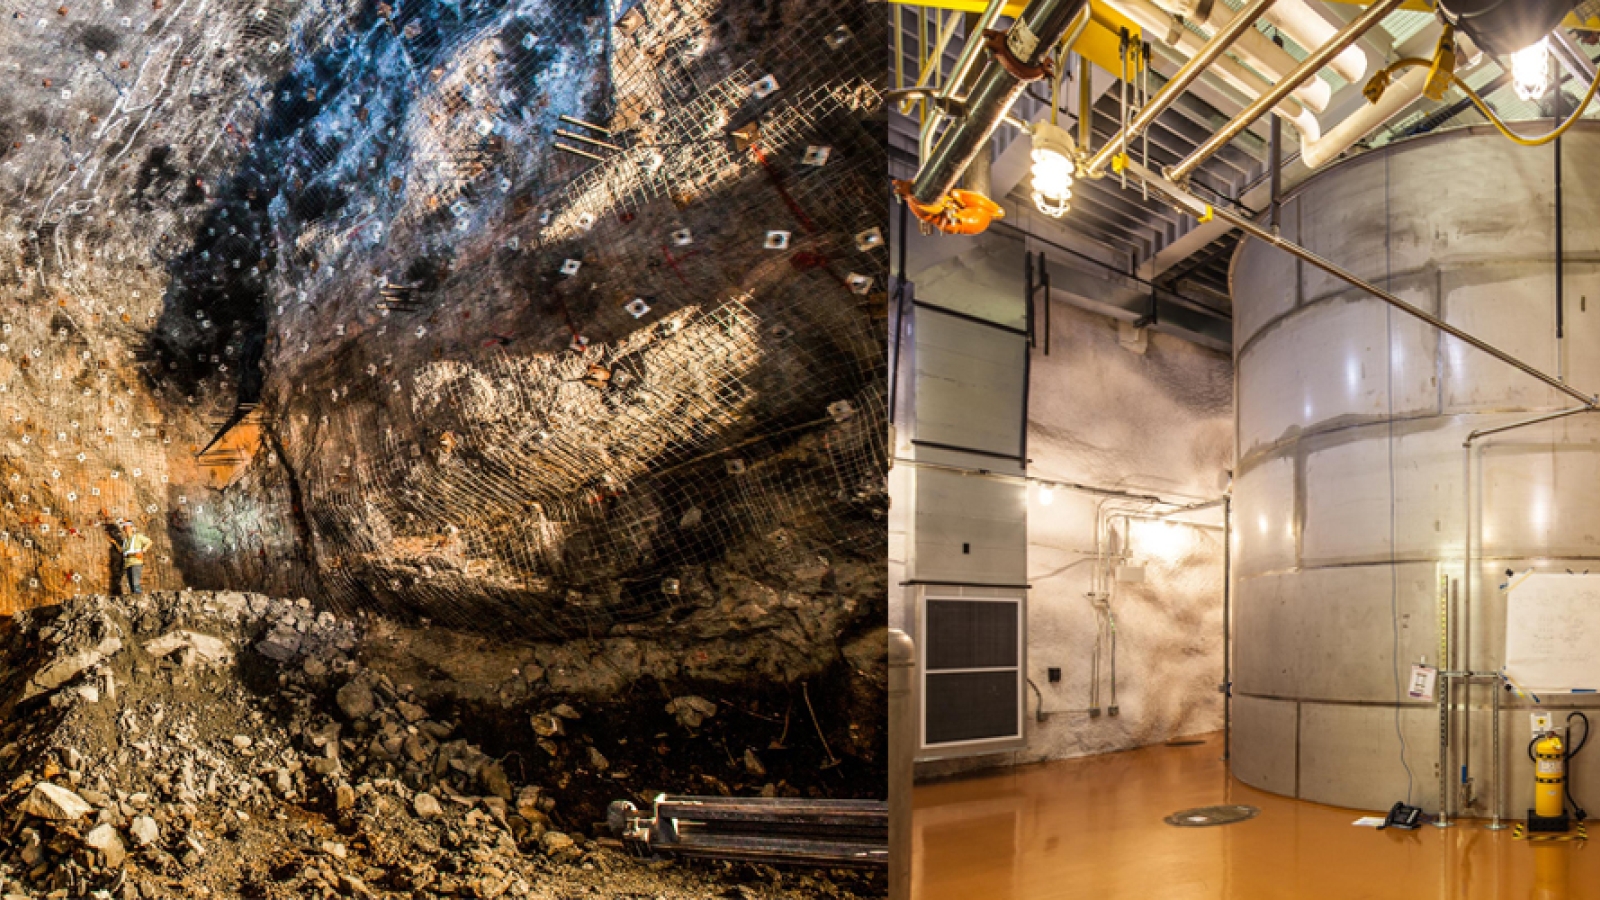 Left side is the Davis Cavern before outfitting. On the right is the Davis Cavern after outfitting